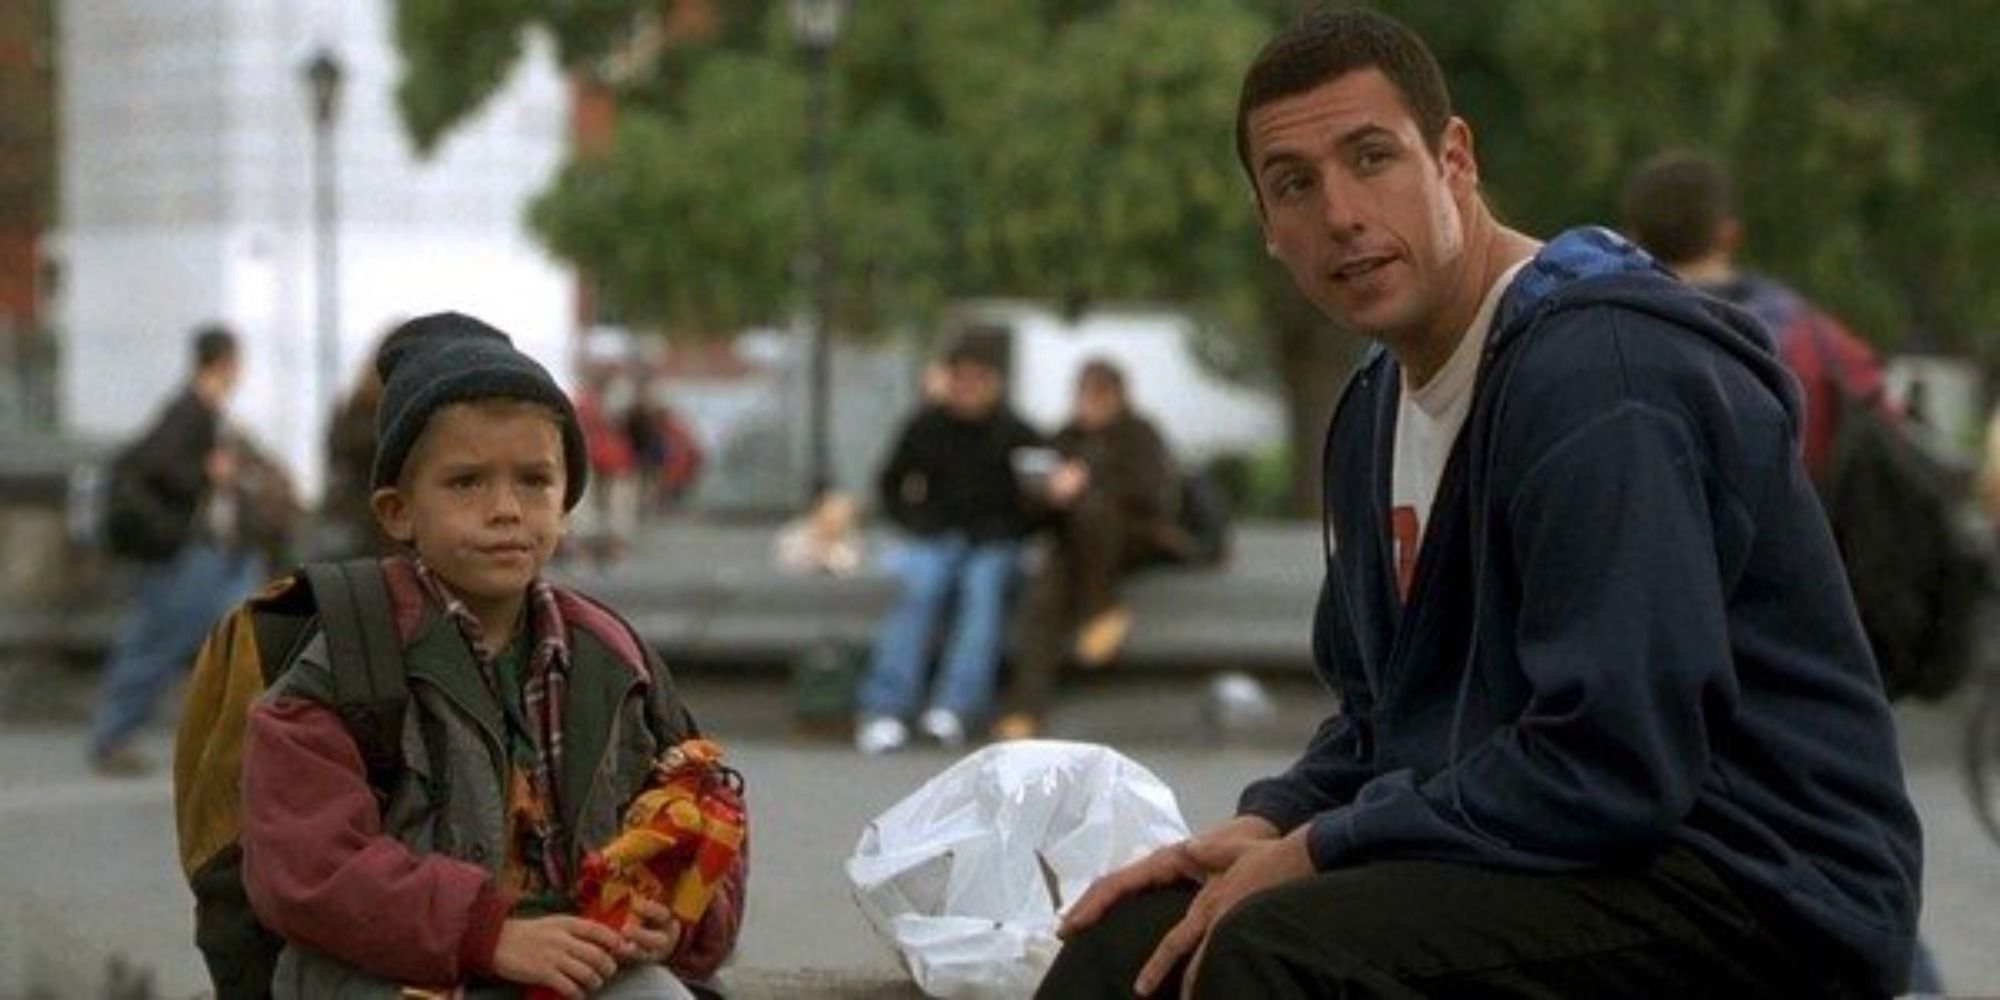 10 Movies Worth Watching To Understand FatherSon Relationships